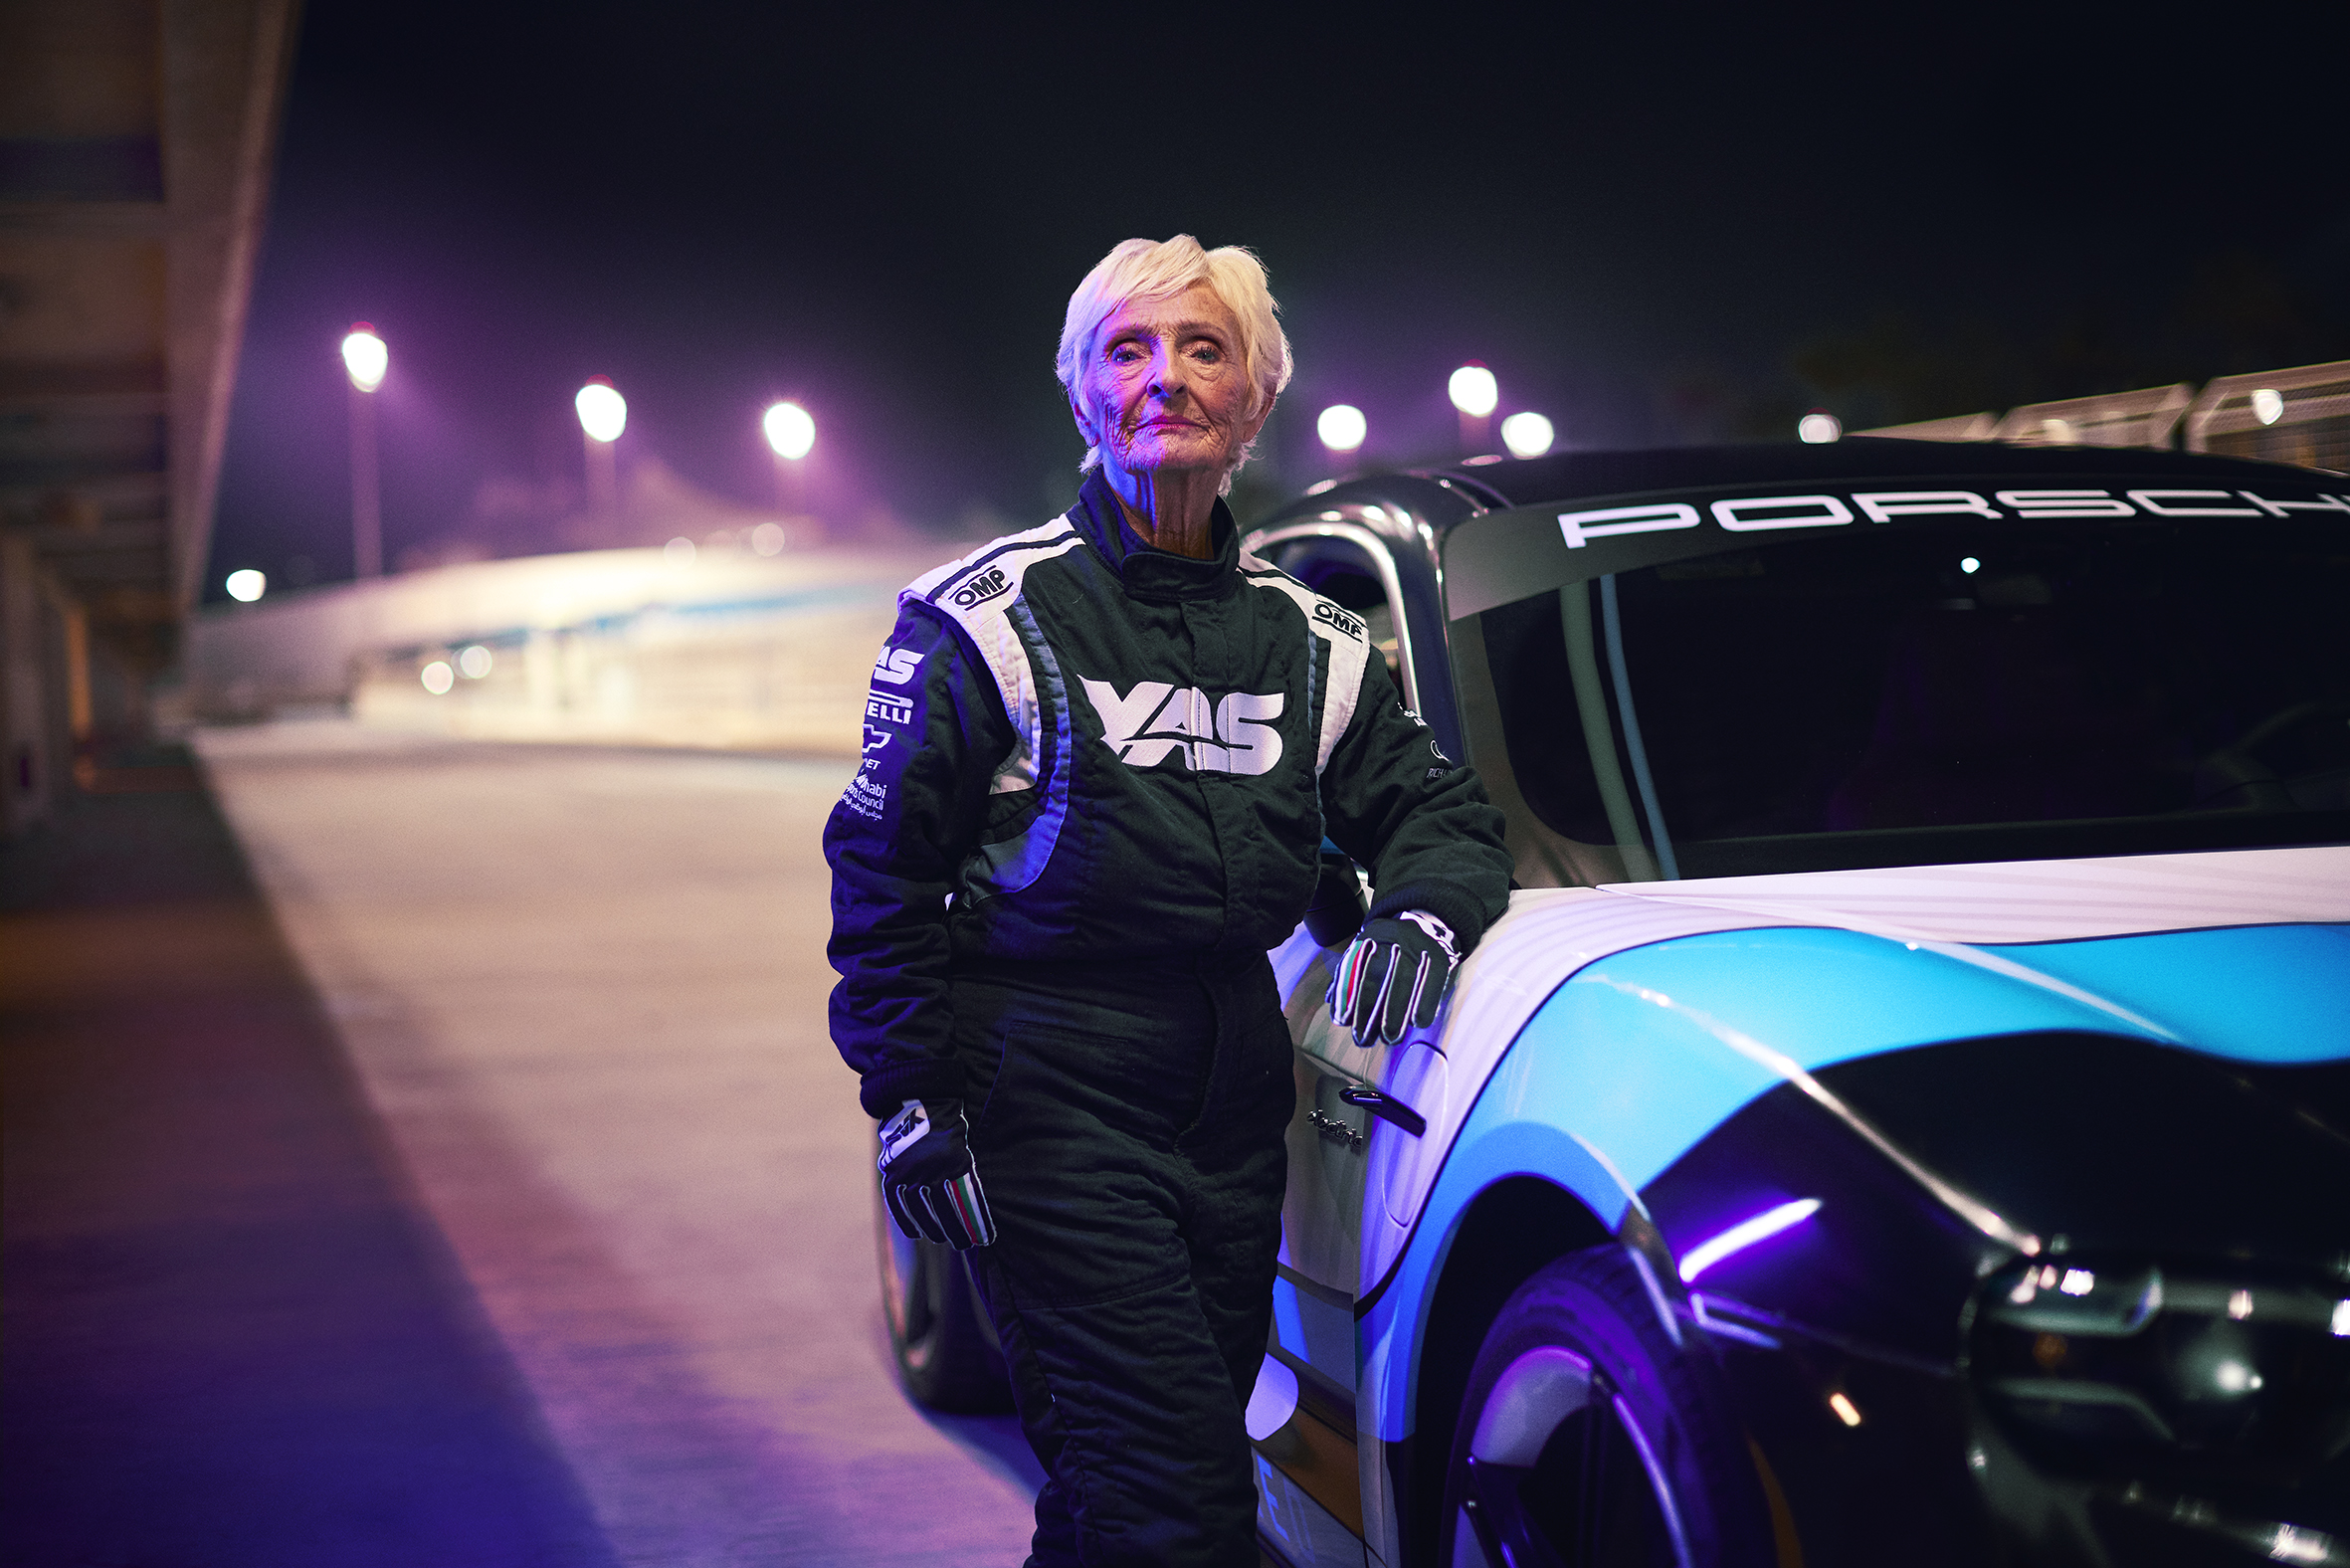 Elderly Western woman in a racing suit standing by a racecar in Yas Marina Circuit